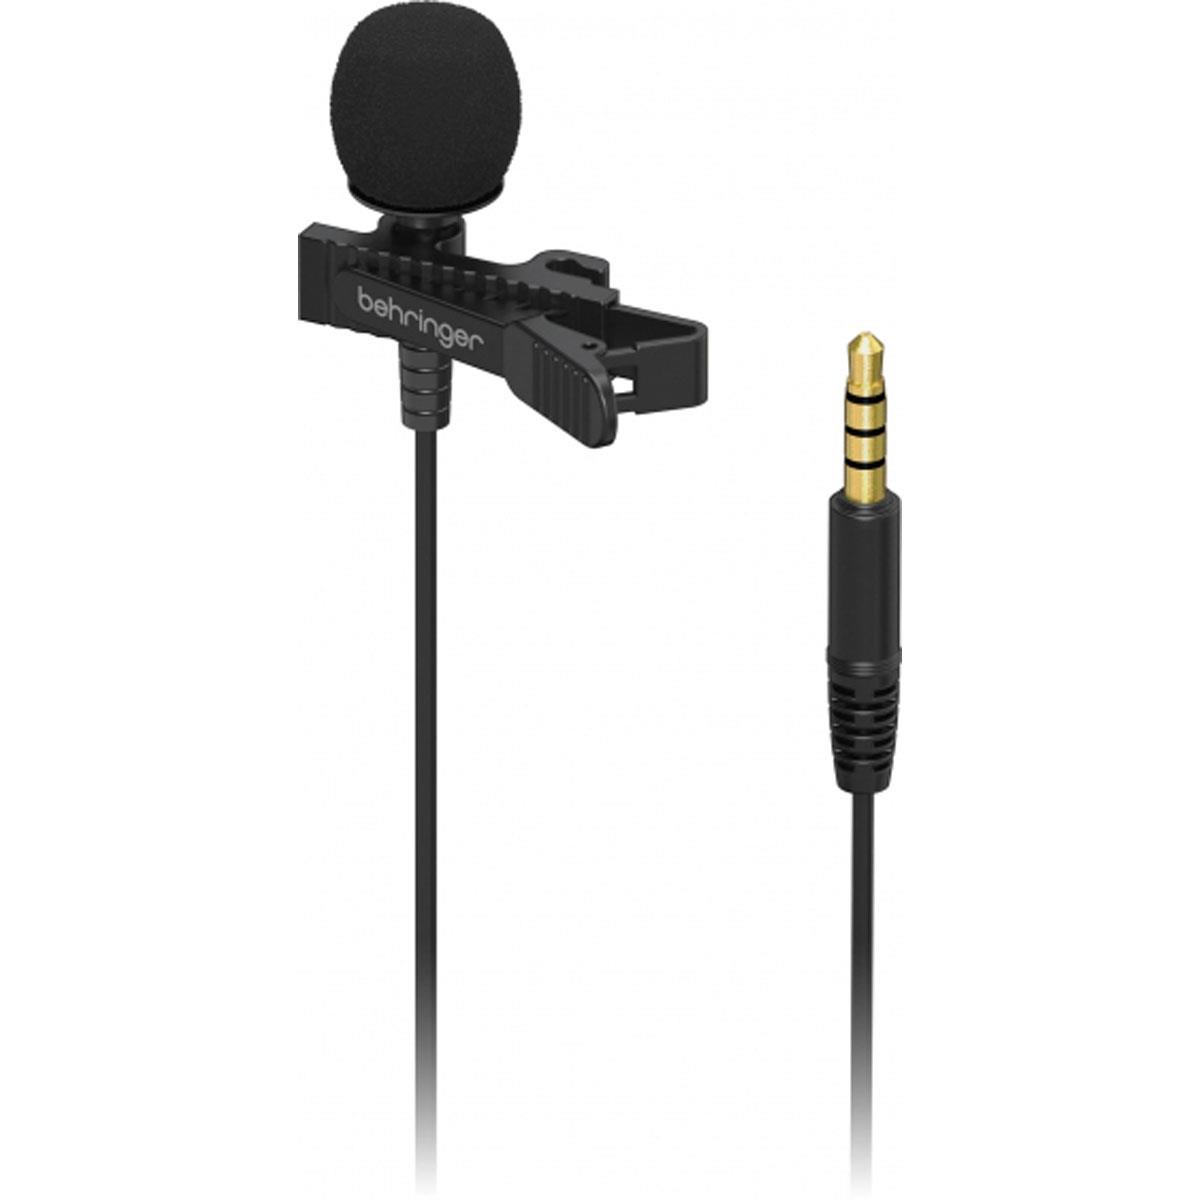 Image of Behringer BC LAV Omnidirectional Condenser Lavalier Mic for Mobile Devices